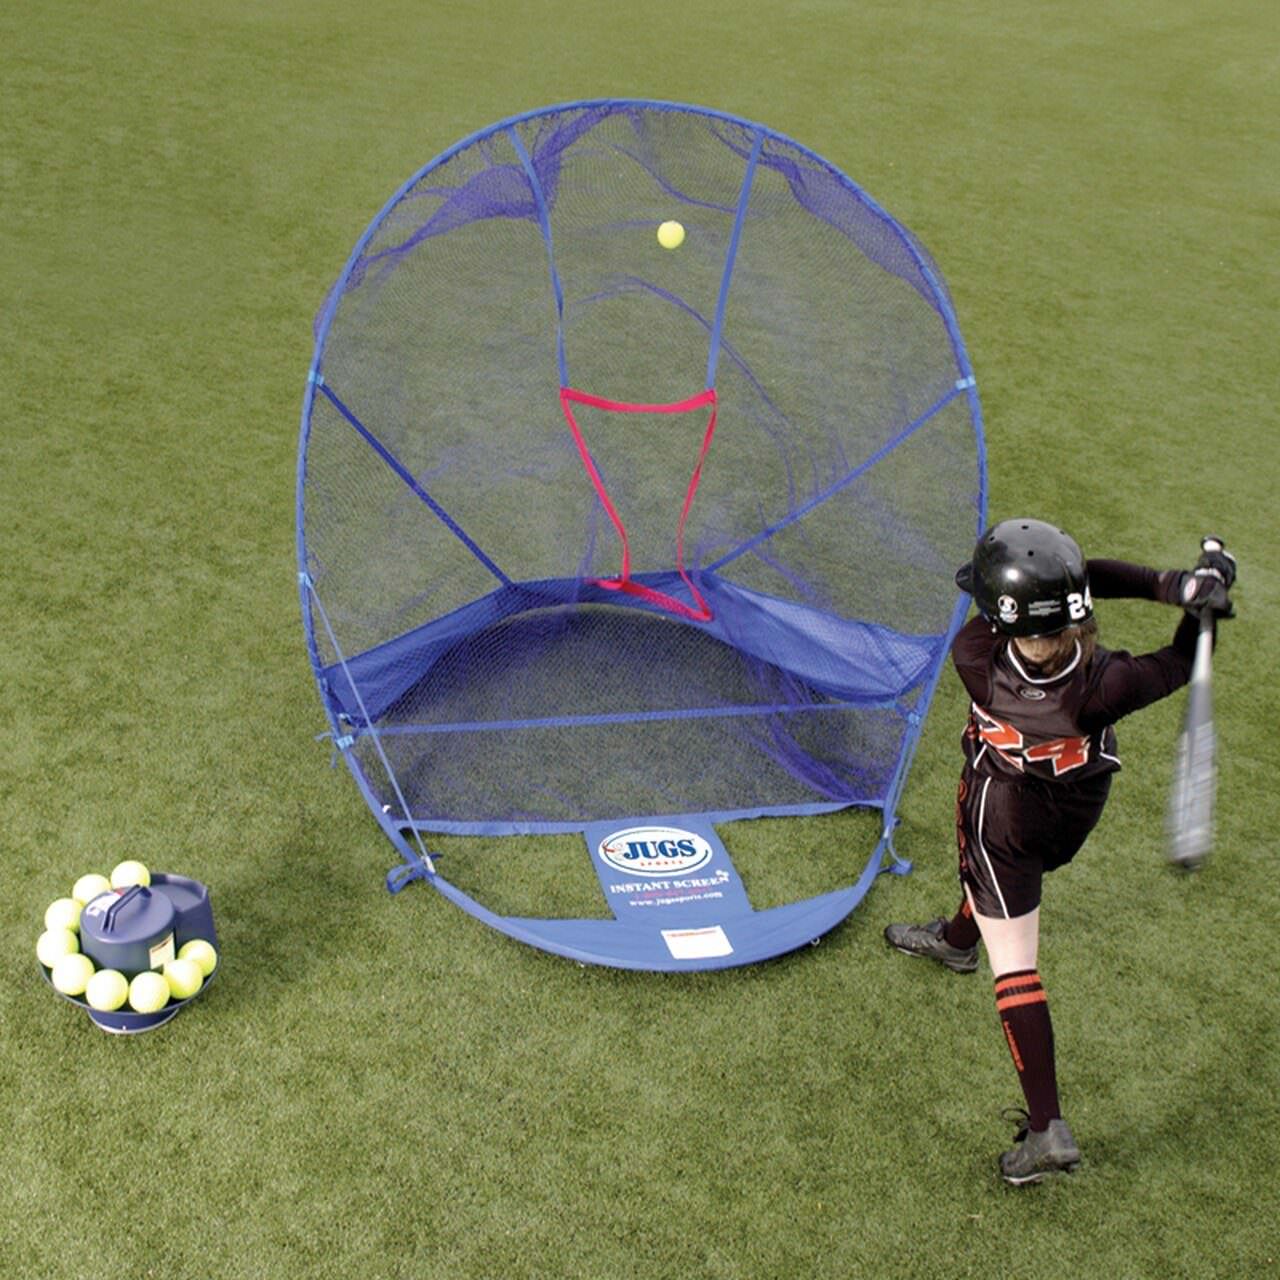 Jugs Toss Soft Toss Machine for Softball with Hitting Station Outdoor Practice